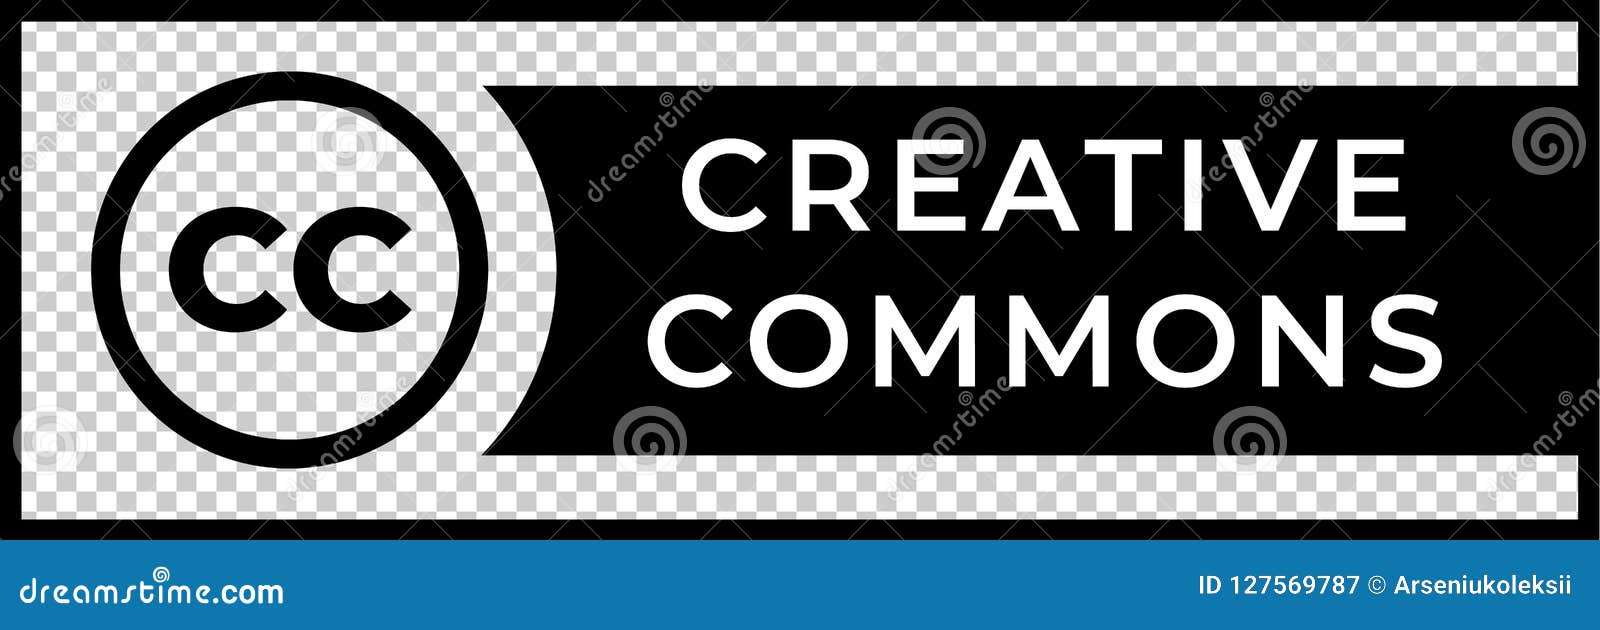 creative commons rights management sign with circular cc icon.